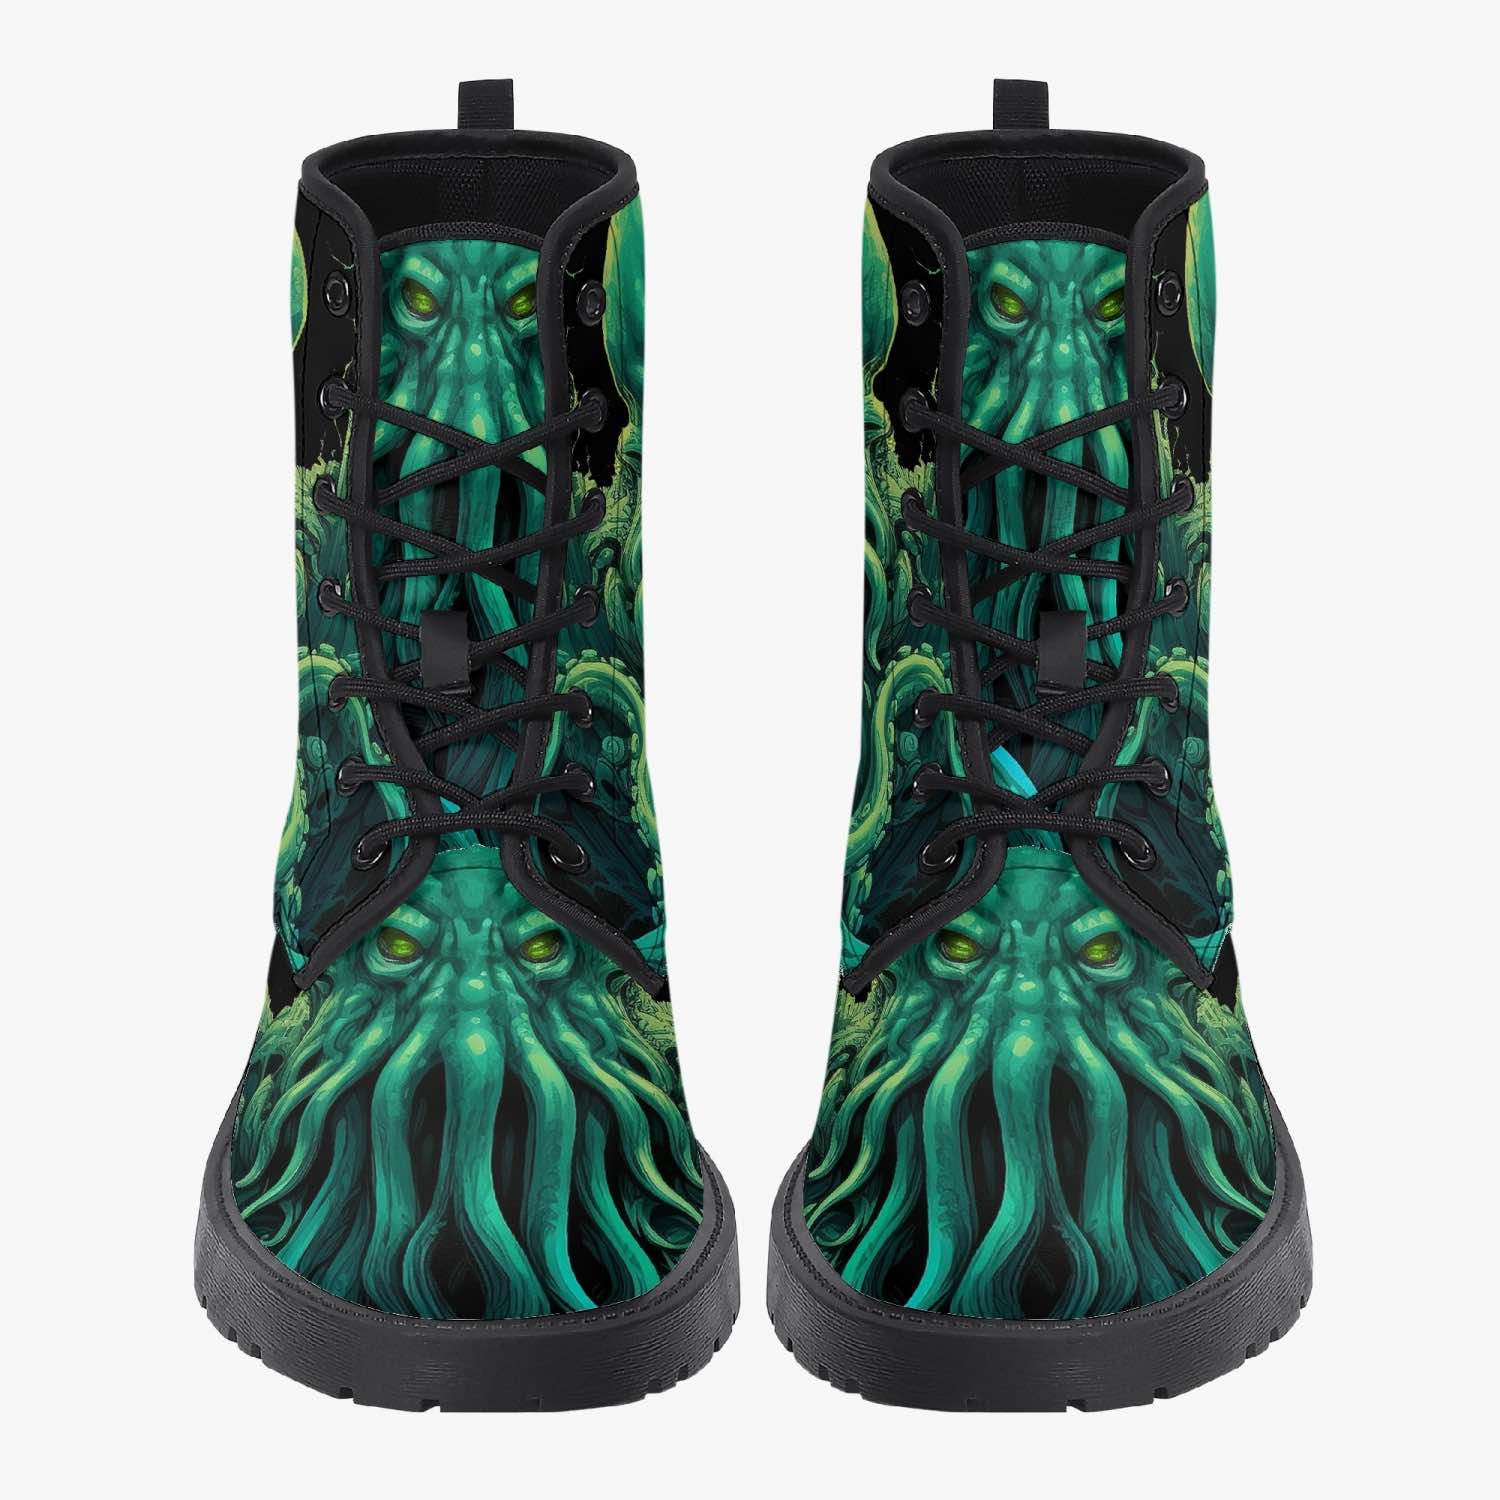 front view of the mighty deep vibrant green and black Cthulhu sea monster on vegan leather boots at Gallery Serpentine